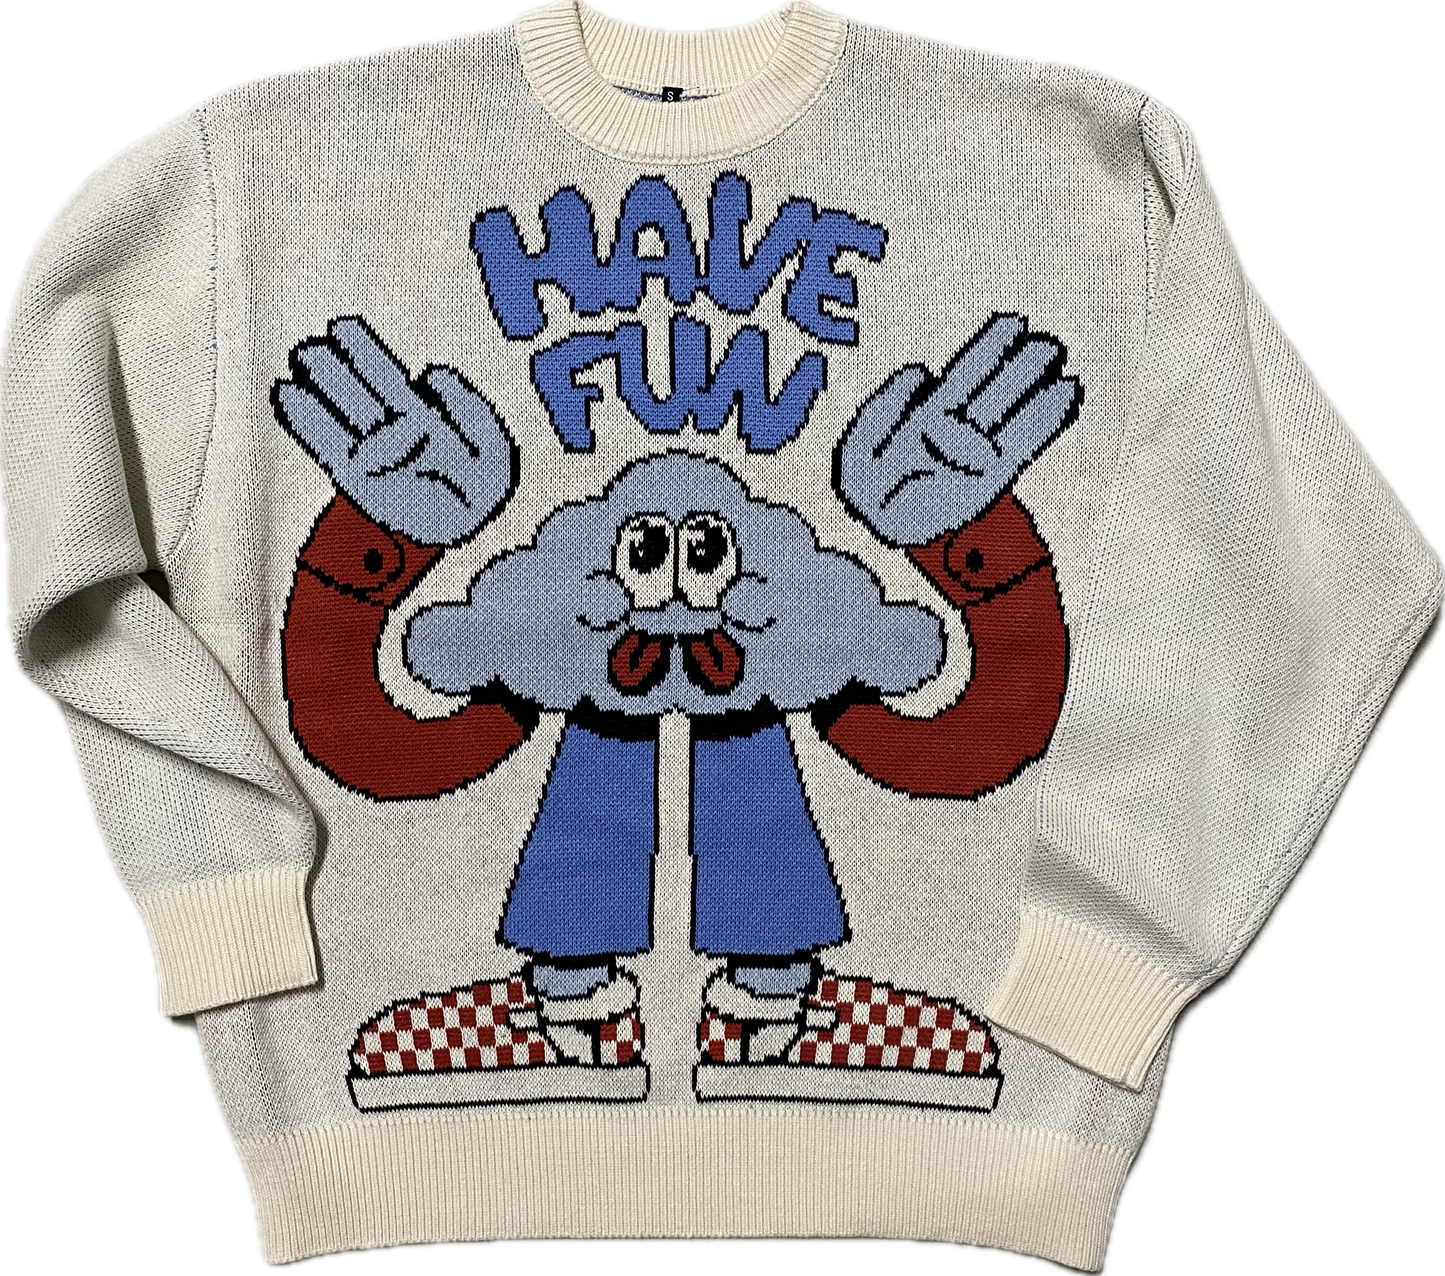 A light blue knitted sweater that reads "have fun" in blue puffy font at the top.  Below the words is a cloud cartoon character with googly eyes and 2 tongues.  It is holding it's arms up that have red long sleeves.  It is wearing blue pants and red and white checkered tennis shoes.